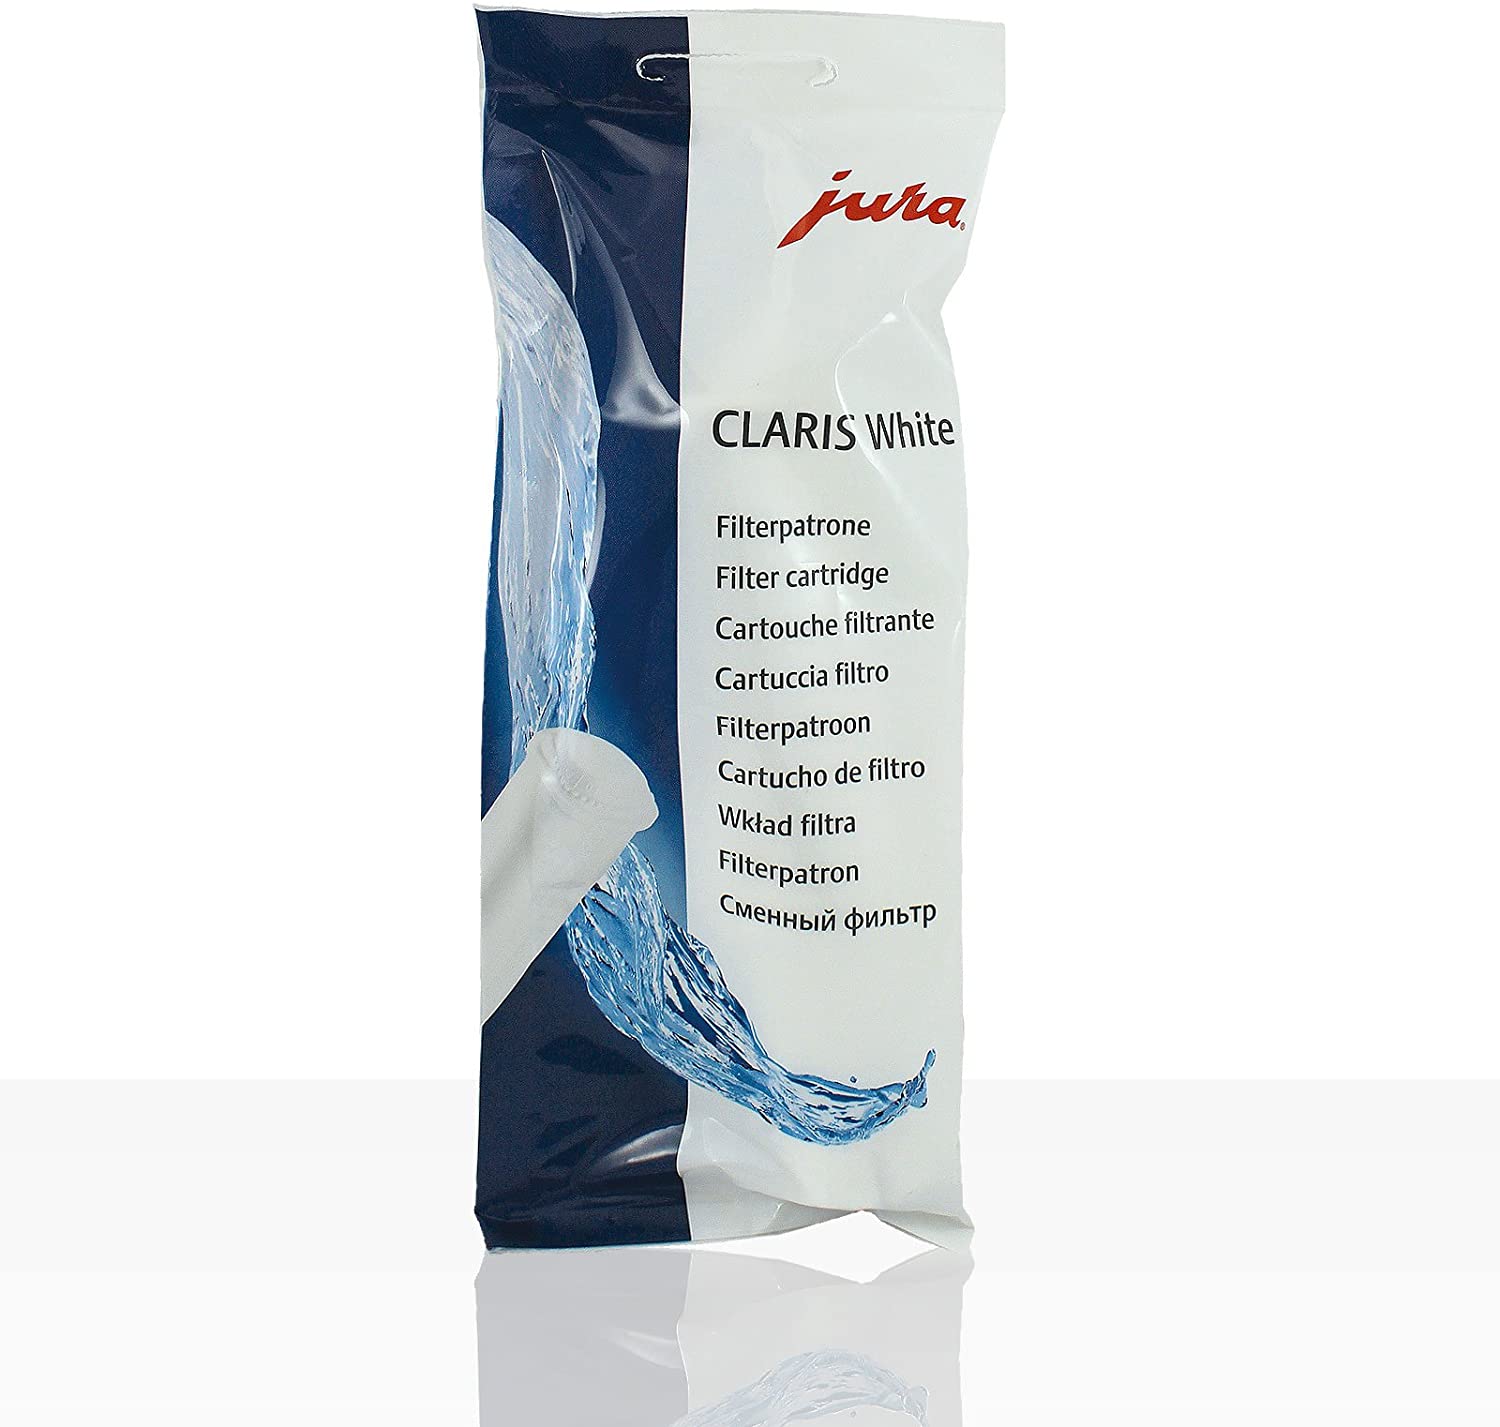 Jura Claris White Filter Cartridge For Impressa And Others, 5 Units